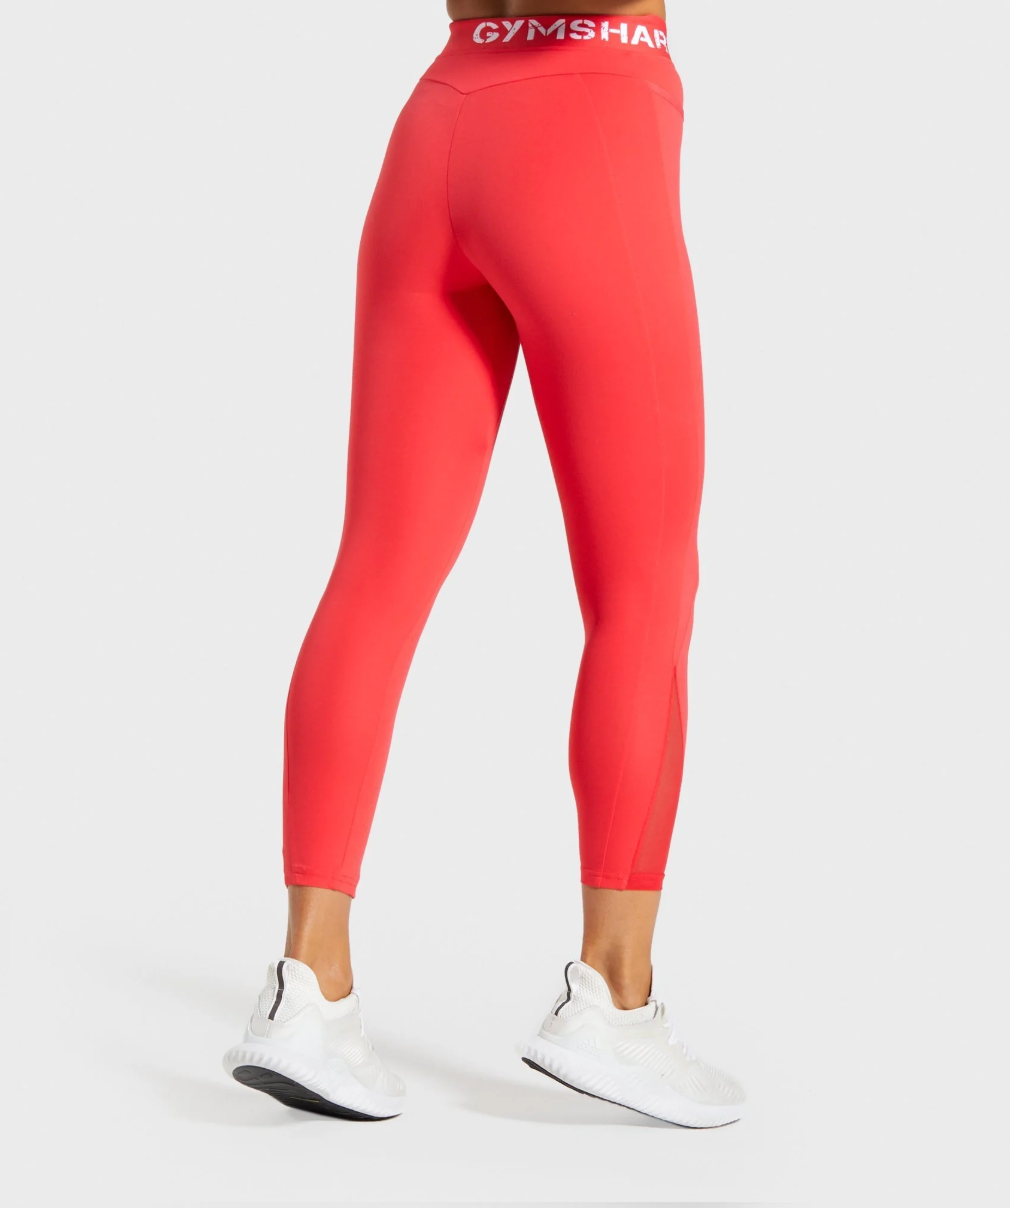 Brand New Gymshark Women's Power Original Leggings, size small - clothing &  accessories - by owner - craigslist